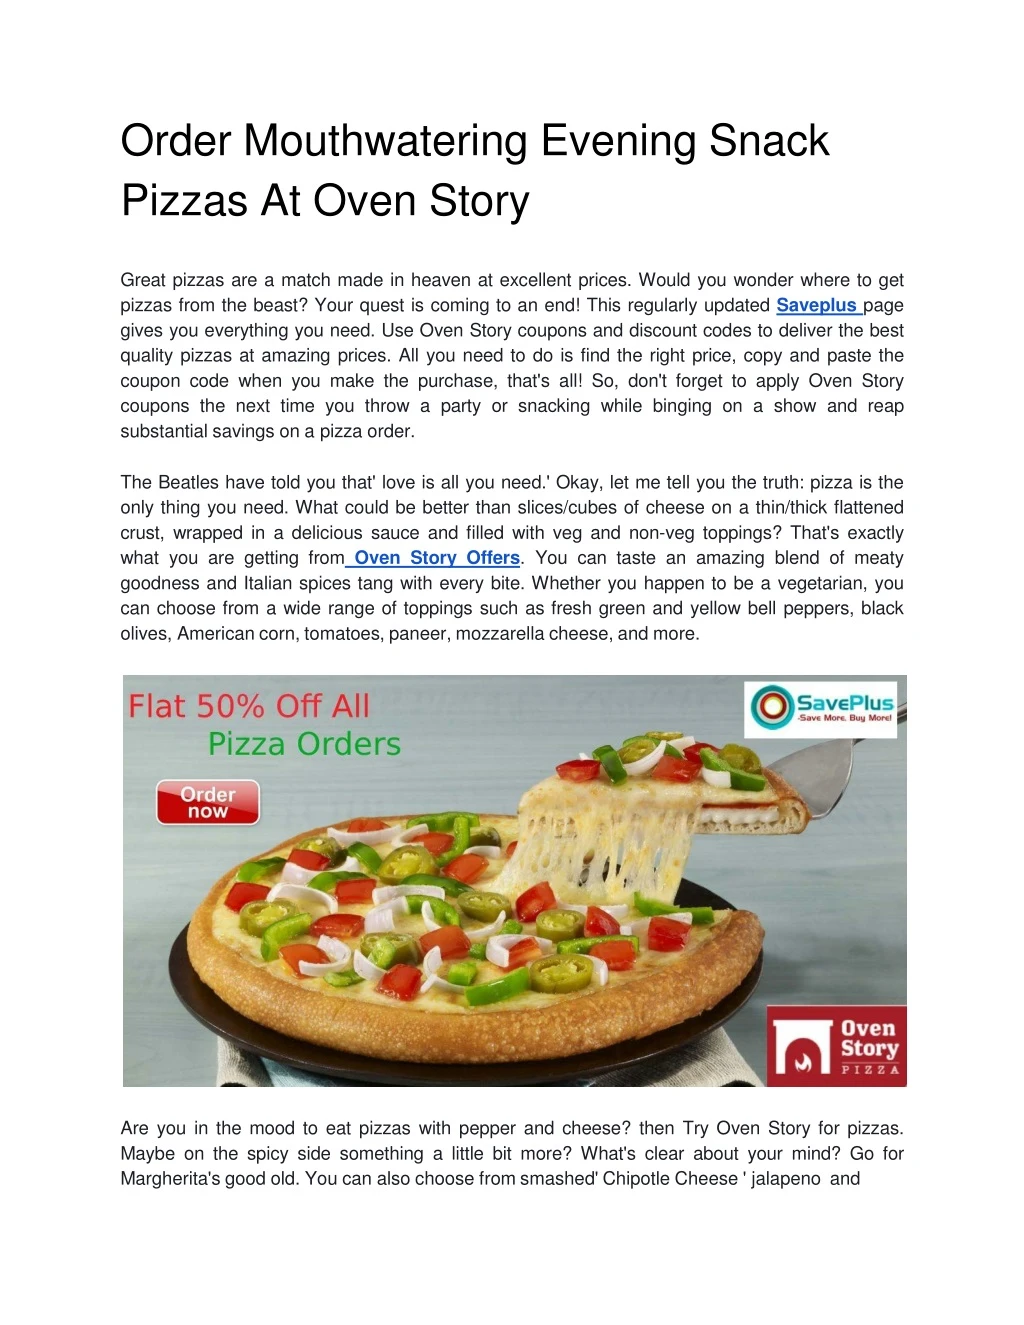 order mouthwatering evening snack pizzas at oven story